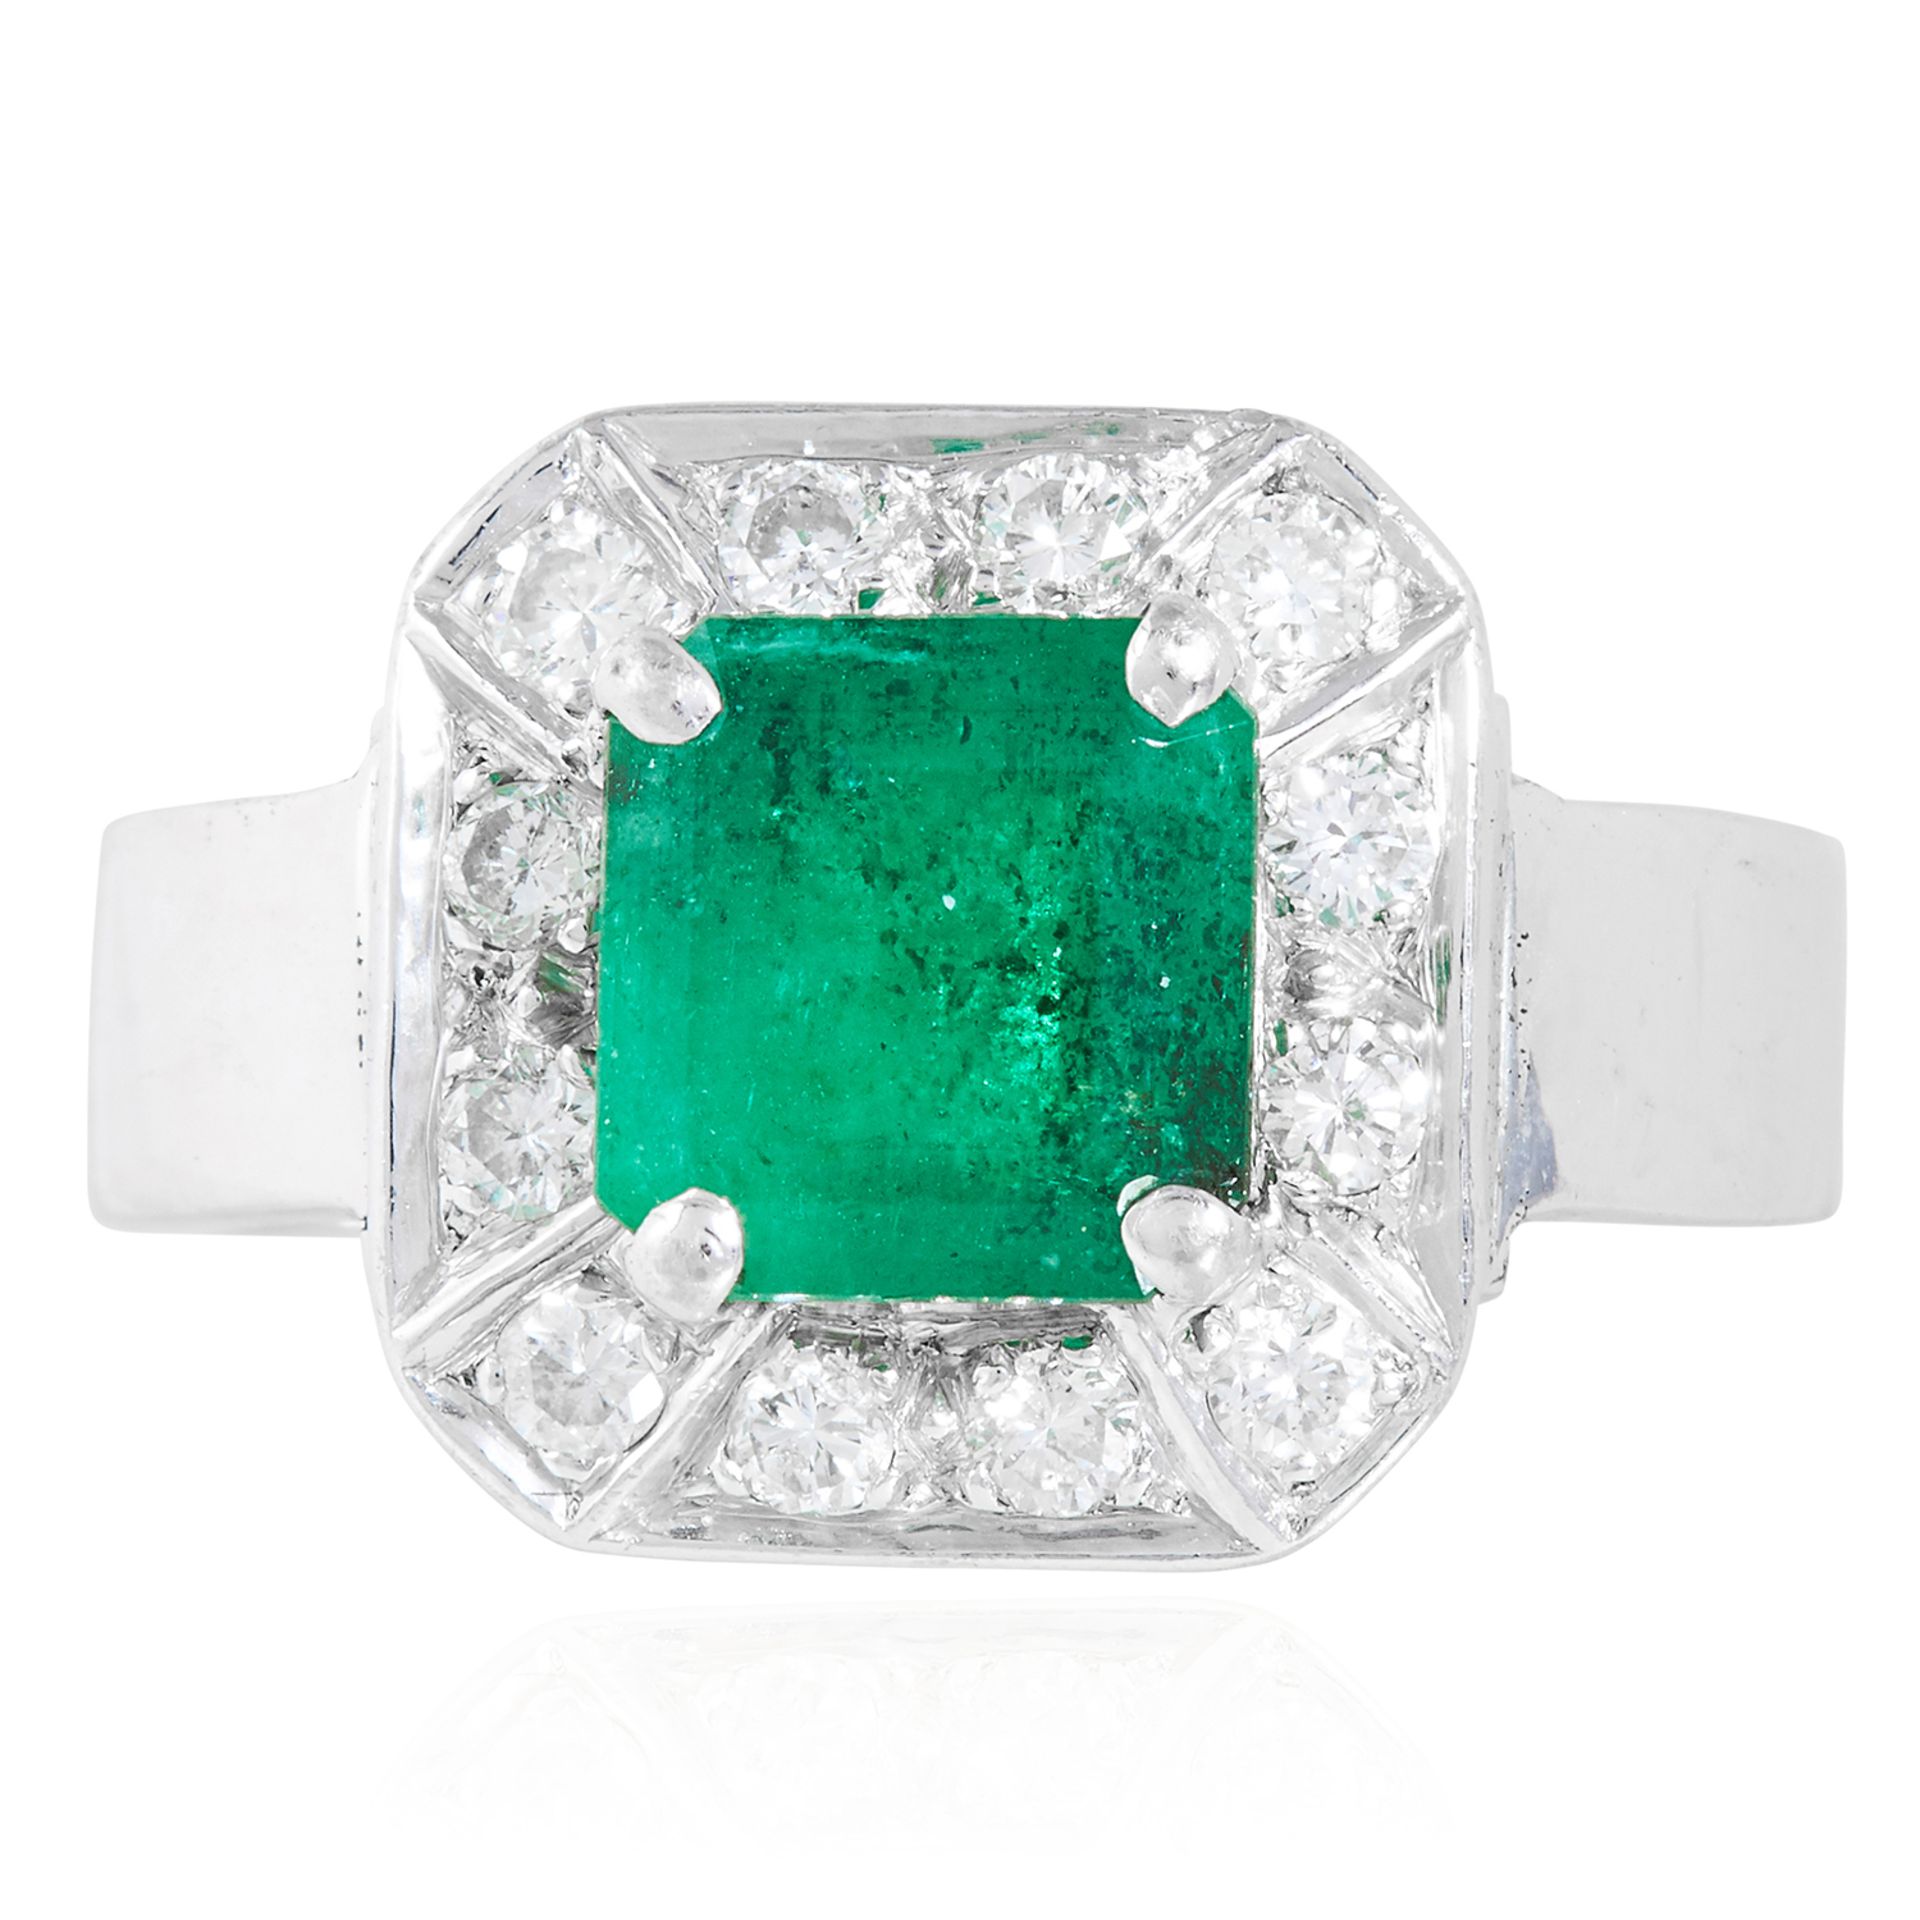 AN EMERALD AND DIAMOND RING in white gold, set with an emerald cut emerald of 2.57 carats within a